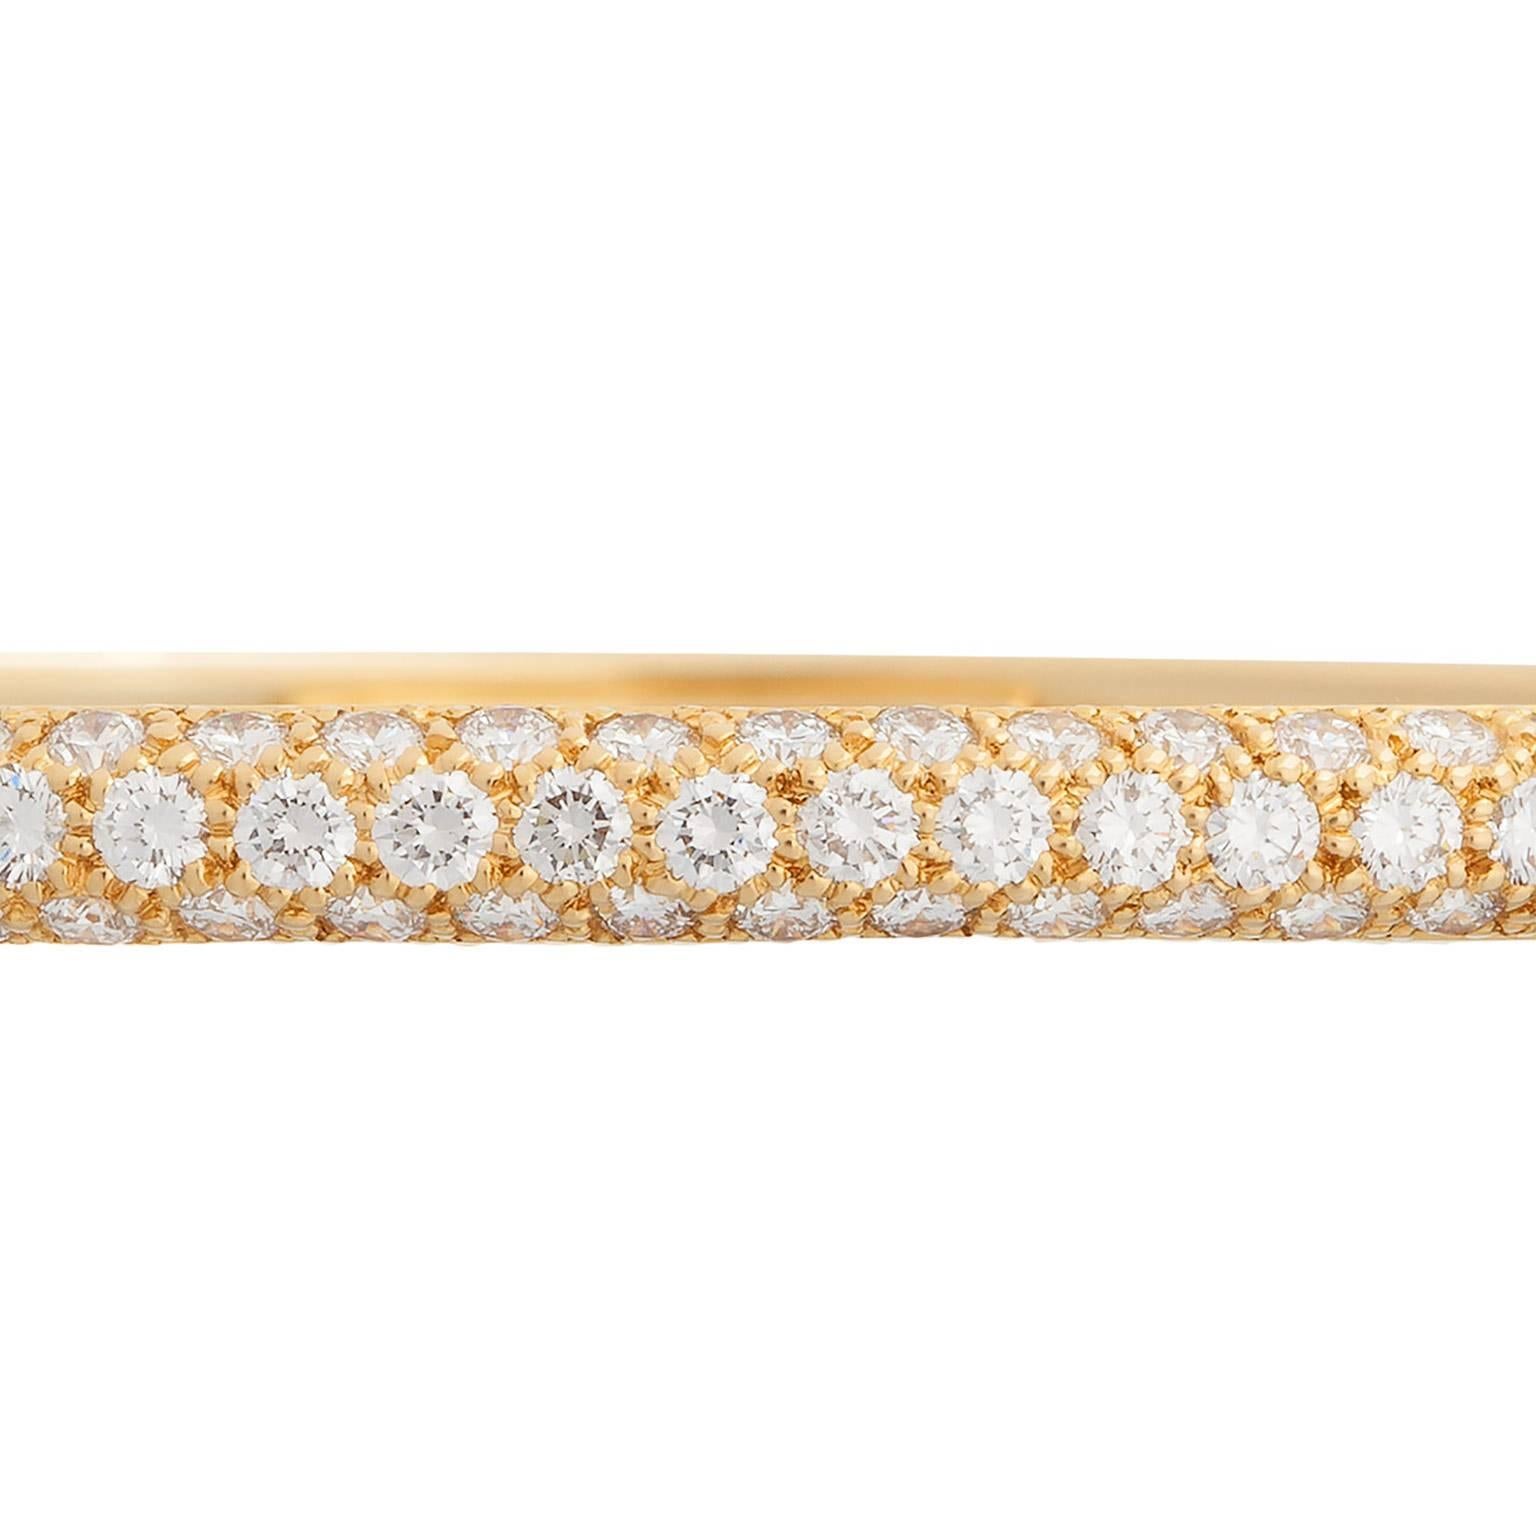 A wonderful Tiffany & Co. pave diamond bangle bracelet.  The diamonds are all round brilliant cuts, set into three rows, in 18K yellow gold, weighing an estimated 2.50cts total.  The diamonds go halfway around the bracelet, and the bracelet has a